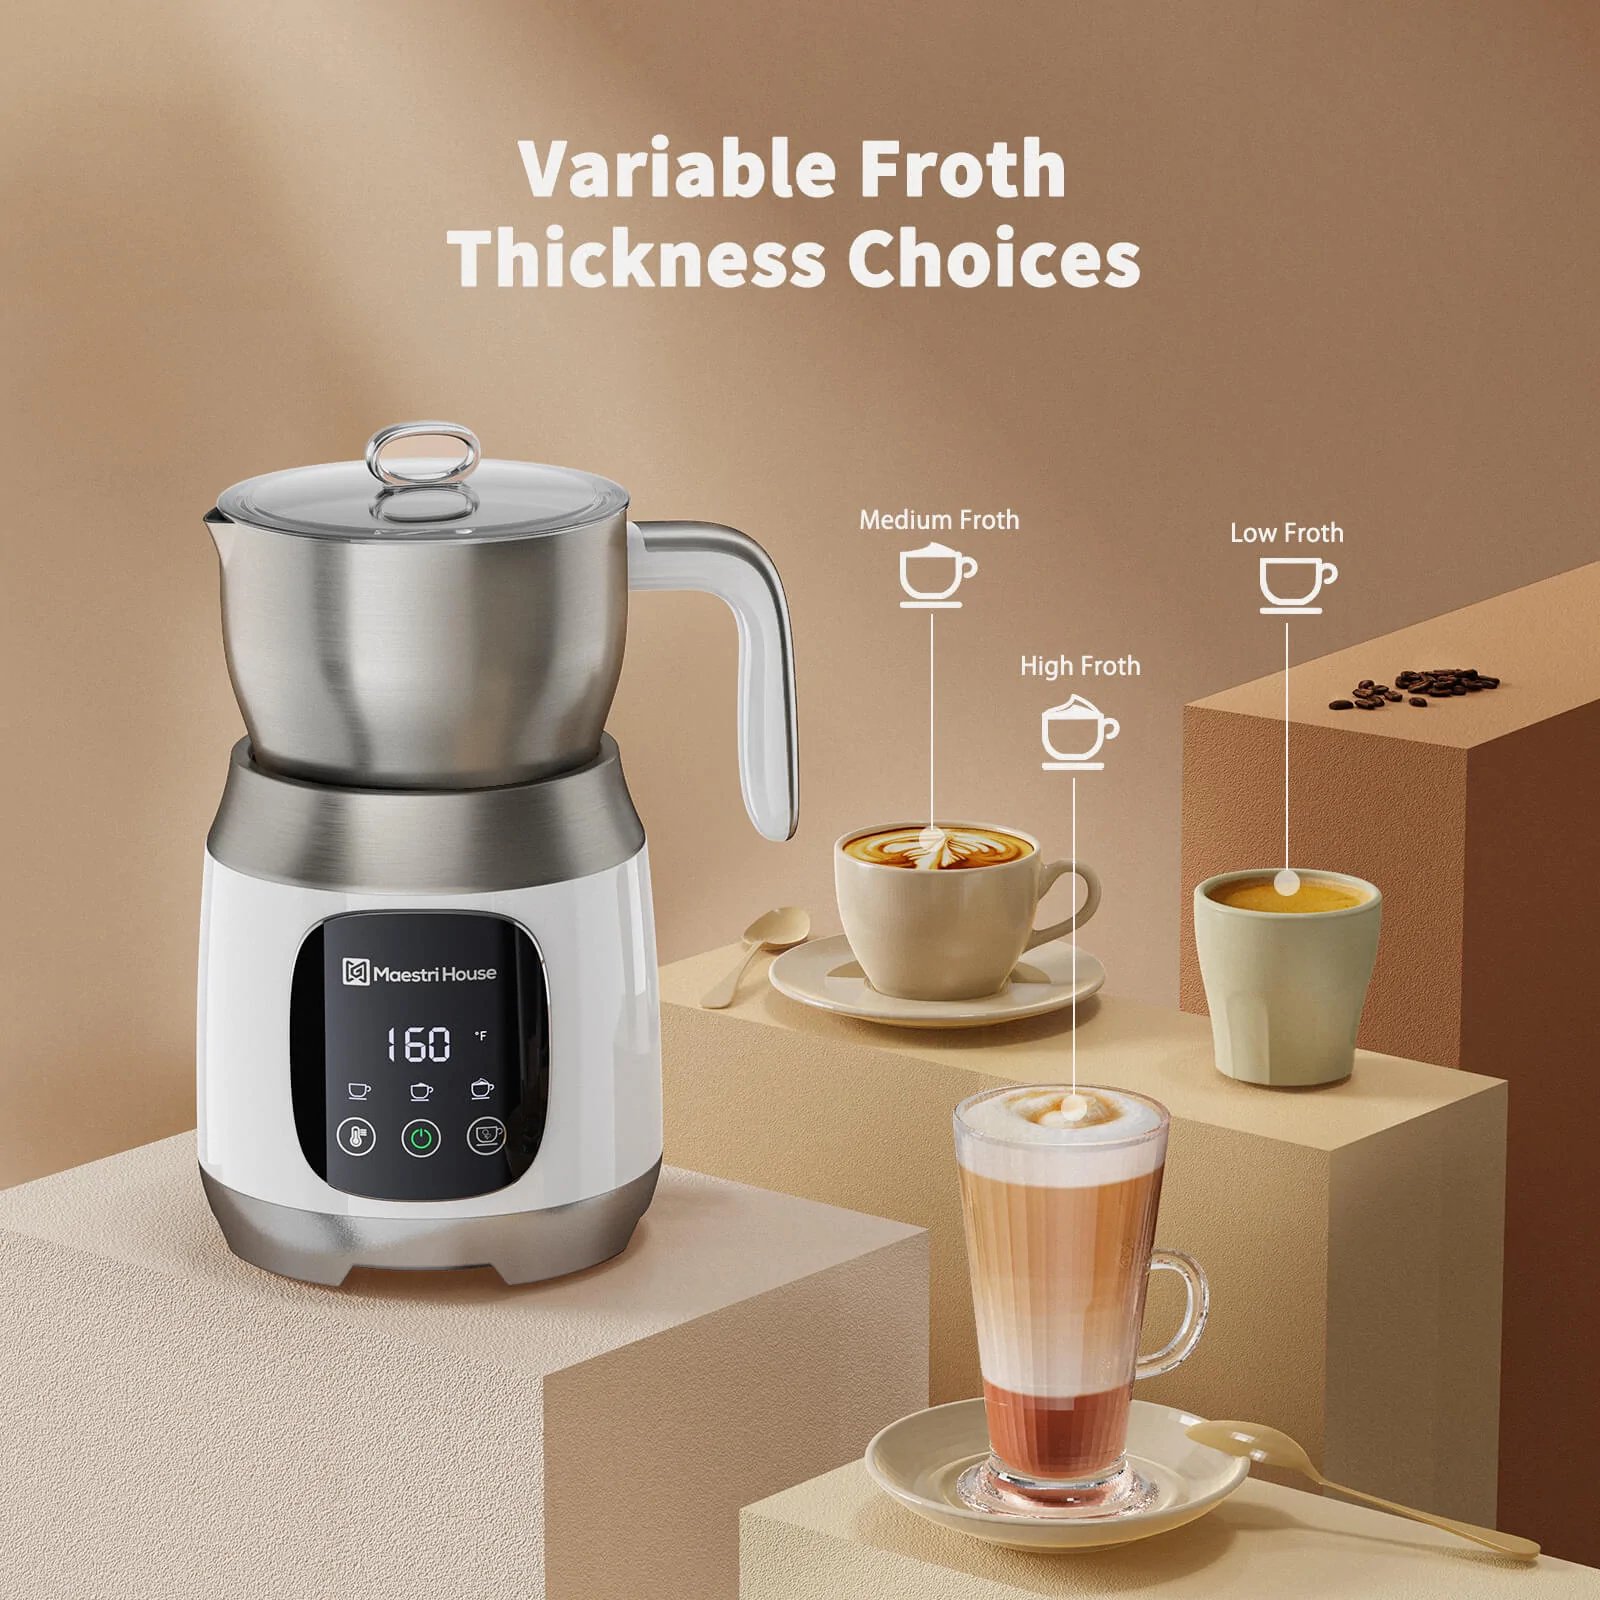 https://discounttoday.net/wp-content/uploads/2022/10/Maestri-House-Milk-Frother-Variable-Temp-and-Froth-Thickness-Milk-Frother-and-Steamer-21OZ-600ML-Smart-Touch-Control-Milk-Warmer-Dishwasher-Safe-Memory-Function-for-Latte-Cappuccino-Hot-Chocolate3.jpeg